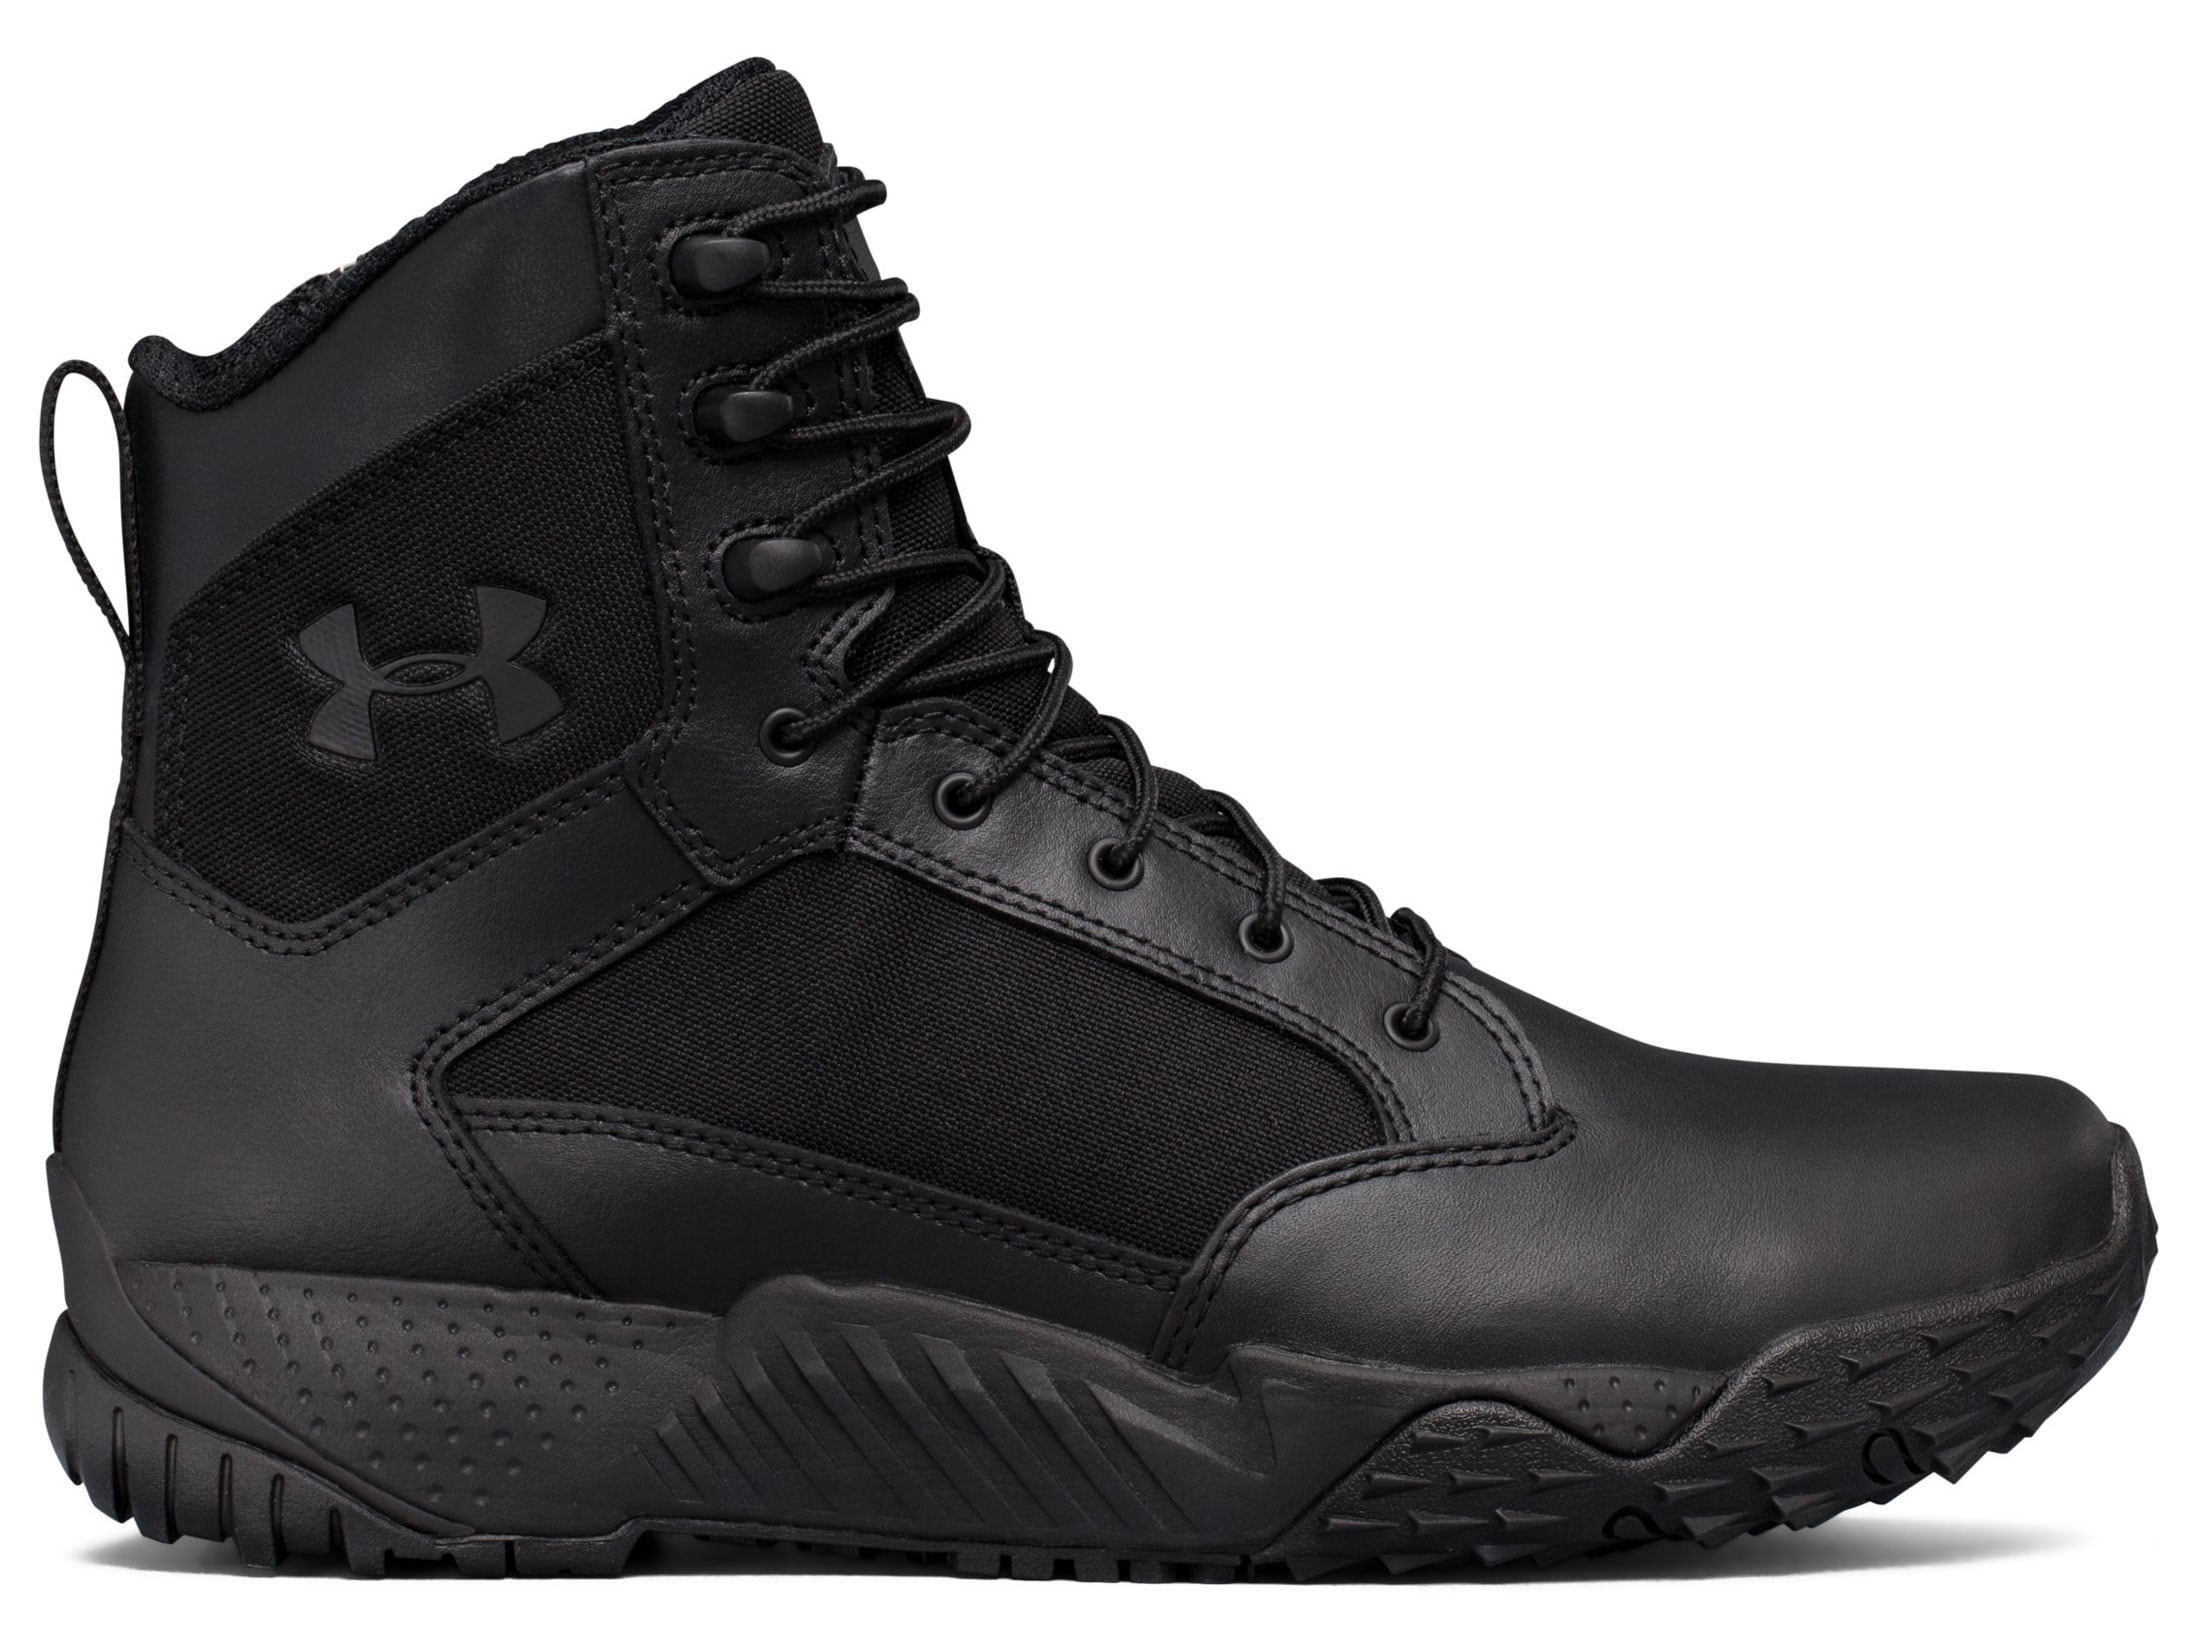 Under Armour UA Stellar 8 Side Zip Tactical Boots Leather Nylon Black